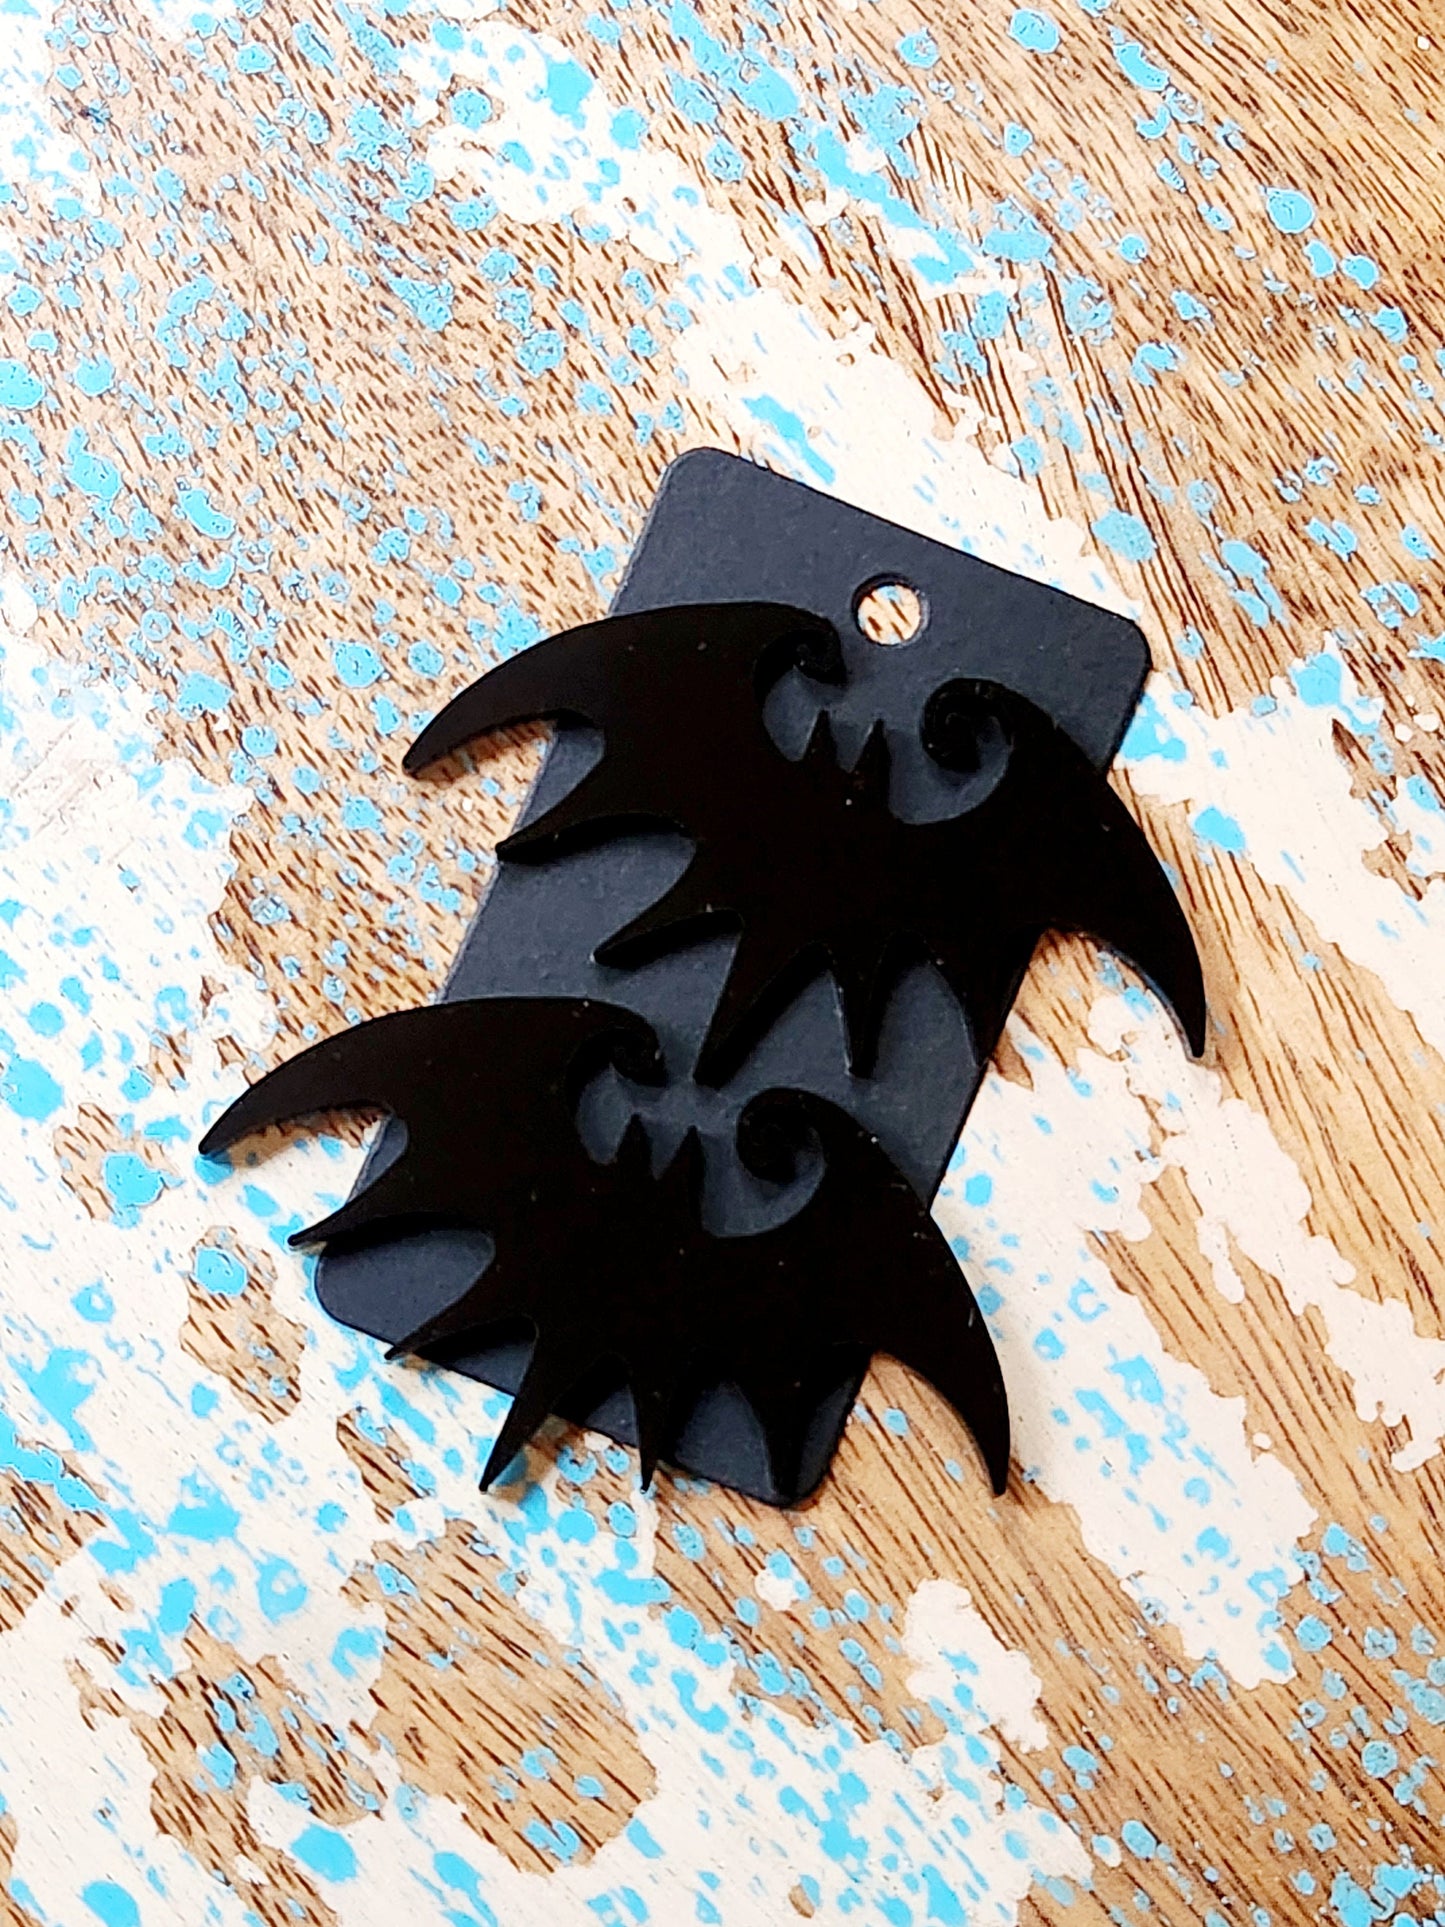 Nightmare Bat Hair Clips - More Colors